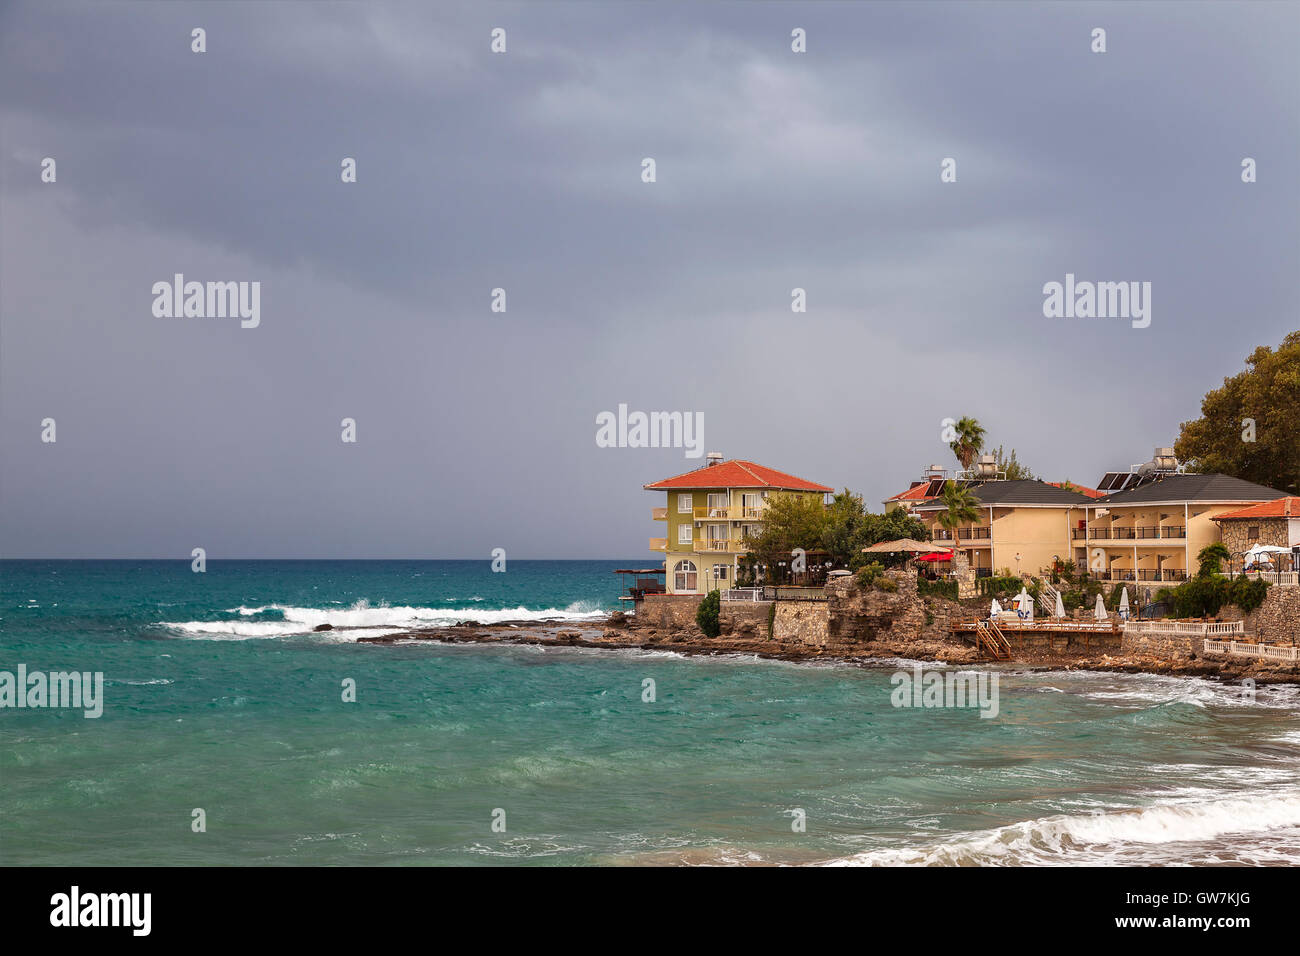 The popular Turkish coastal resort of Side, on a stormy day. Stock Photo